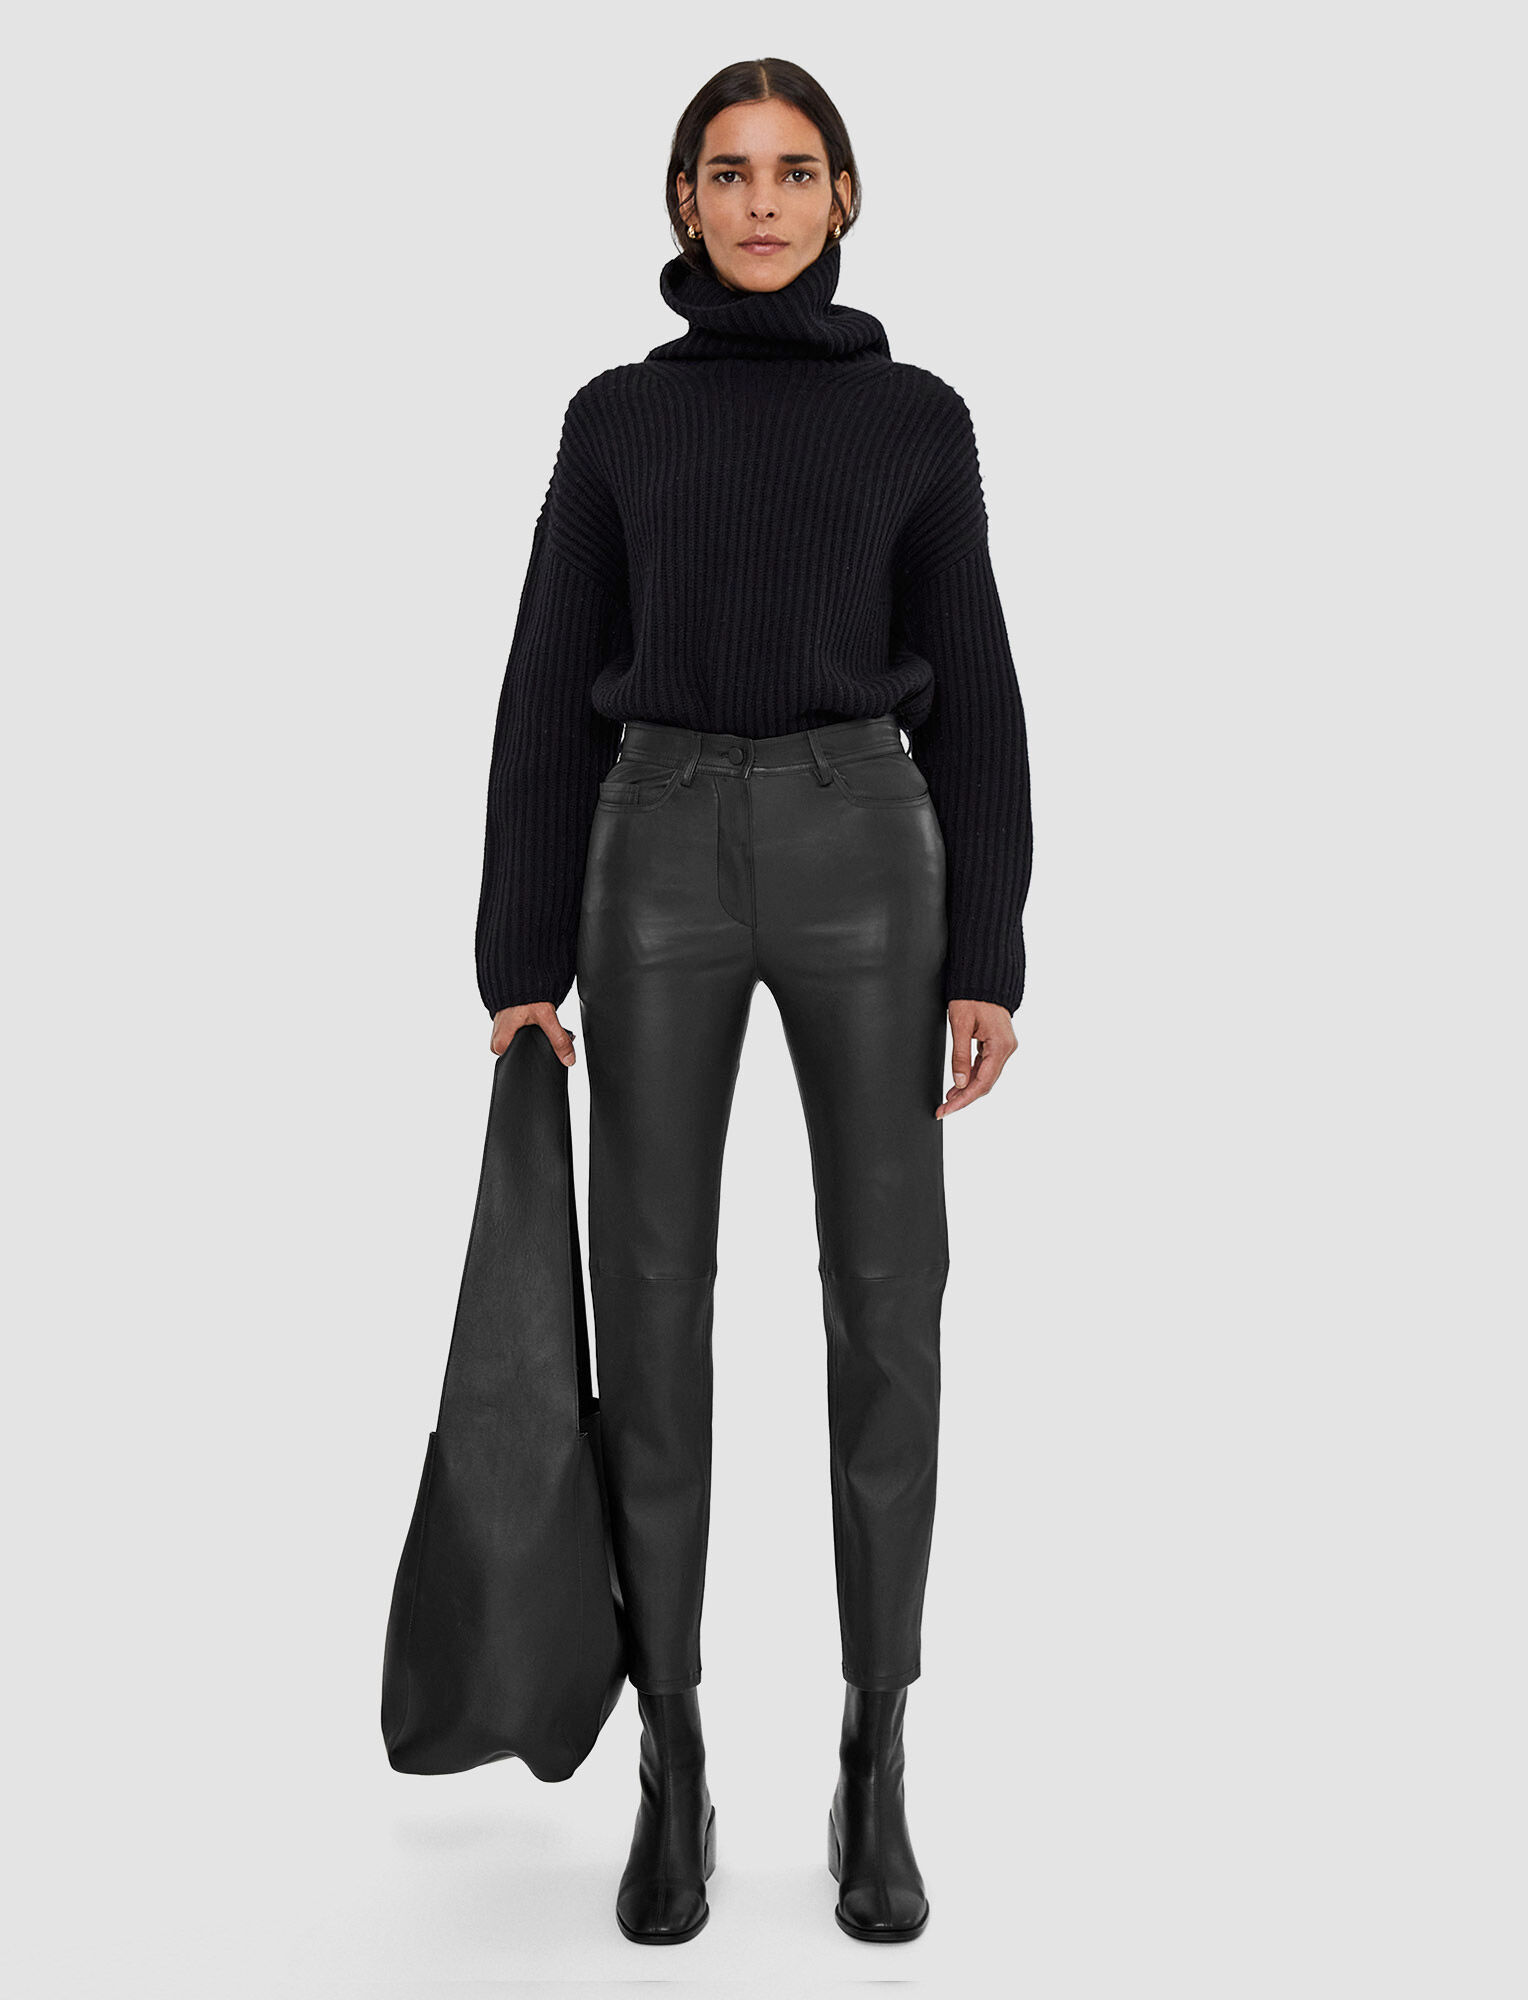 Joseph, Leather Stretch Teddy Trousers, in Black